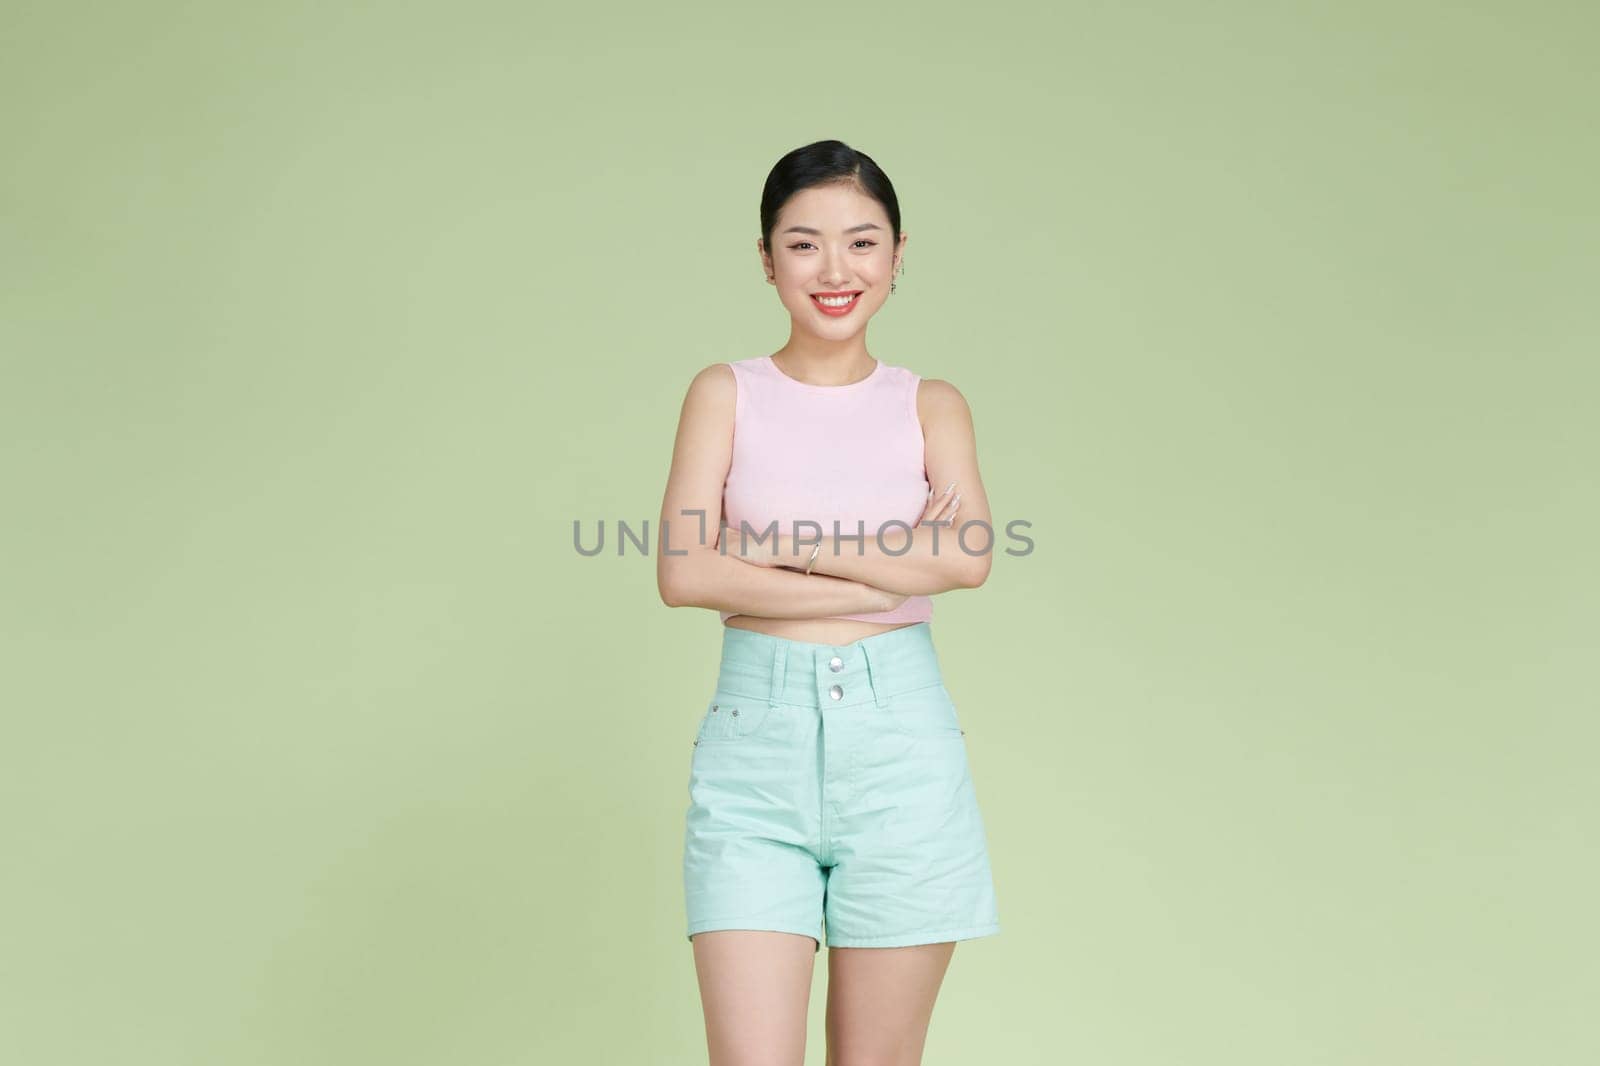 Smiling woman with arms crossed standing against pastel green background